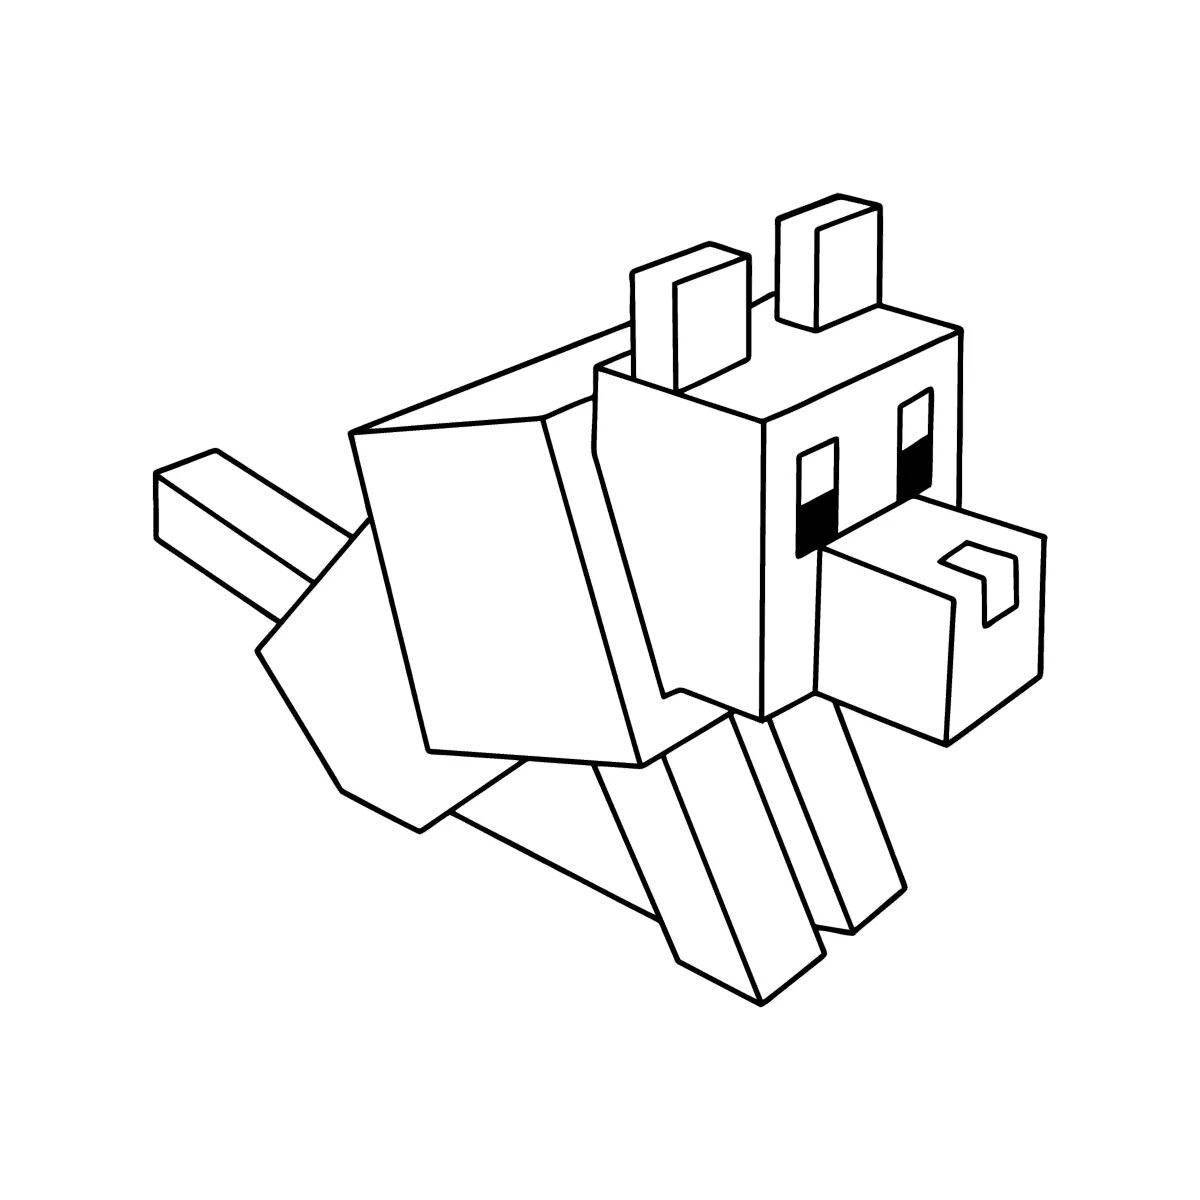 Minecraft cats live coloring page